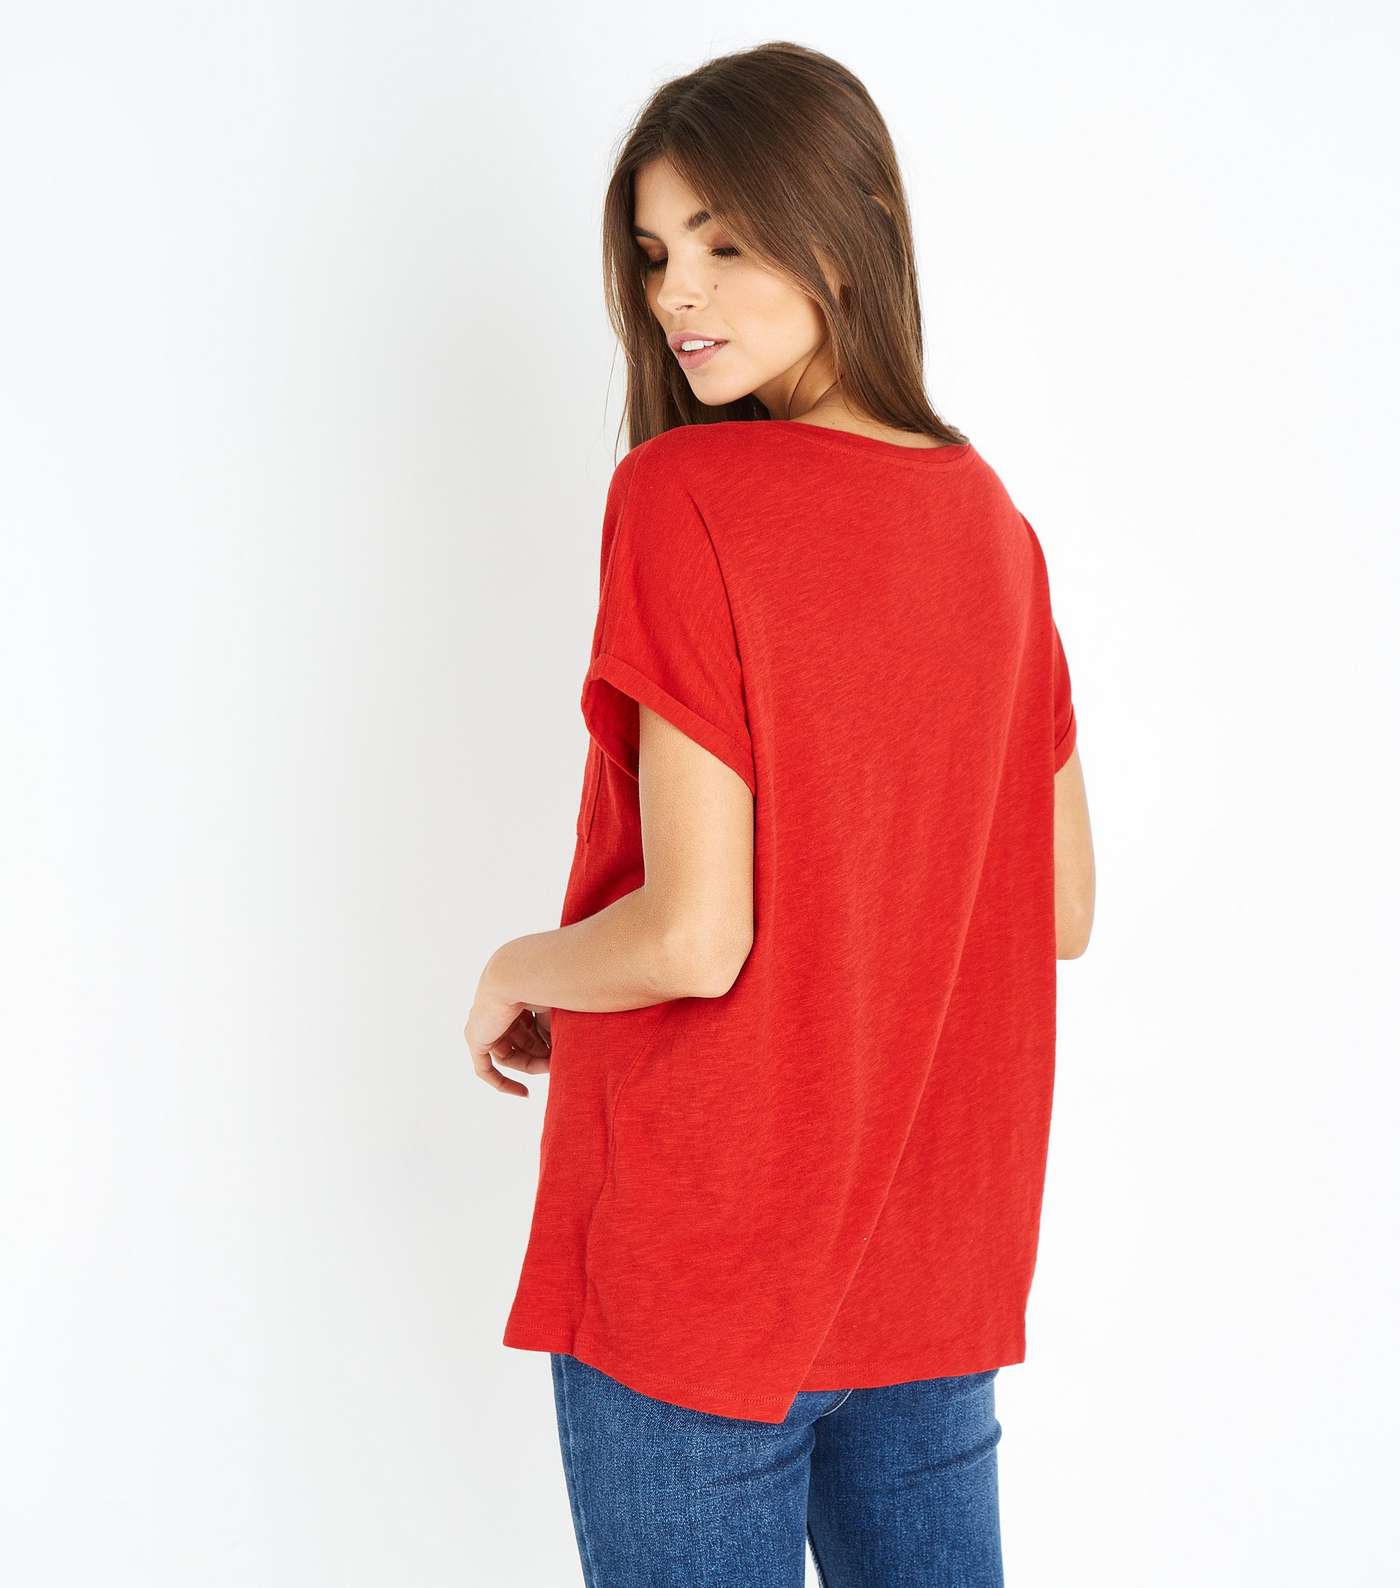 Red Organic Cotton Pocket Front T-Shirt Image 3